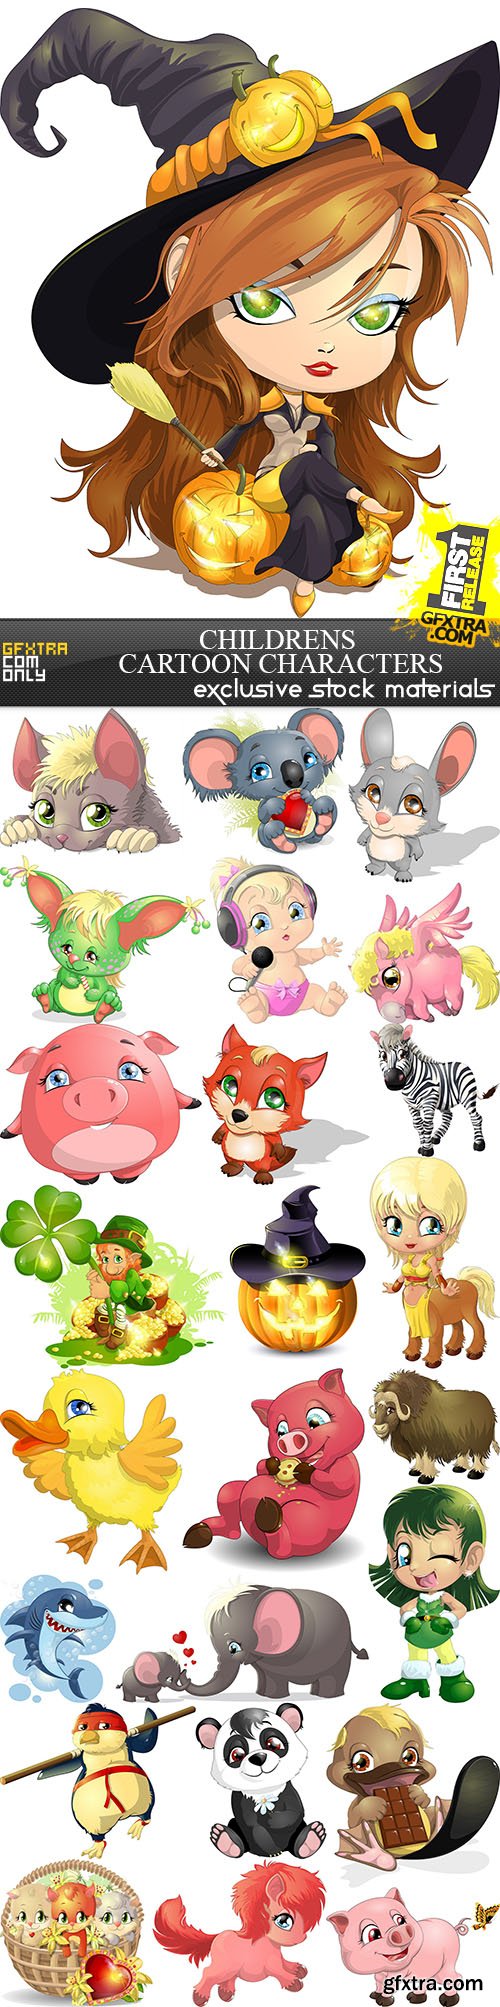 Childrens Cartoon Characters, 25xEPS